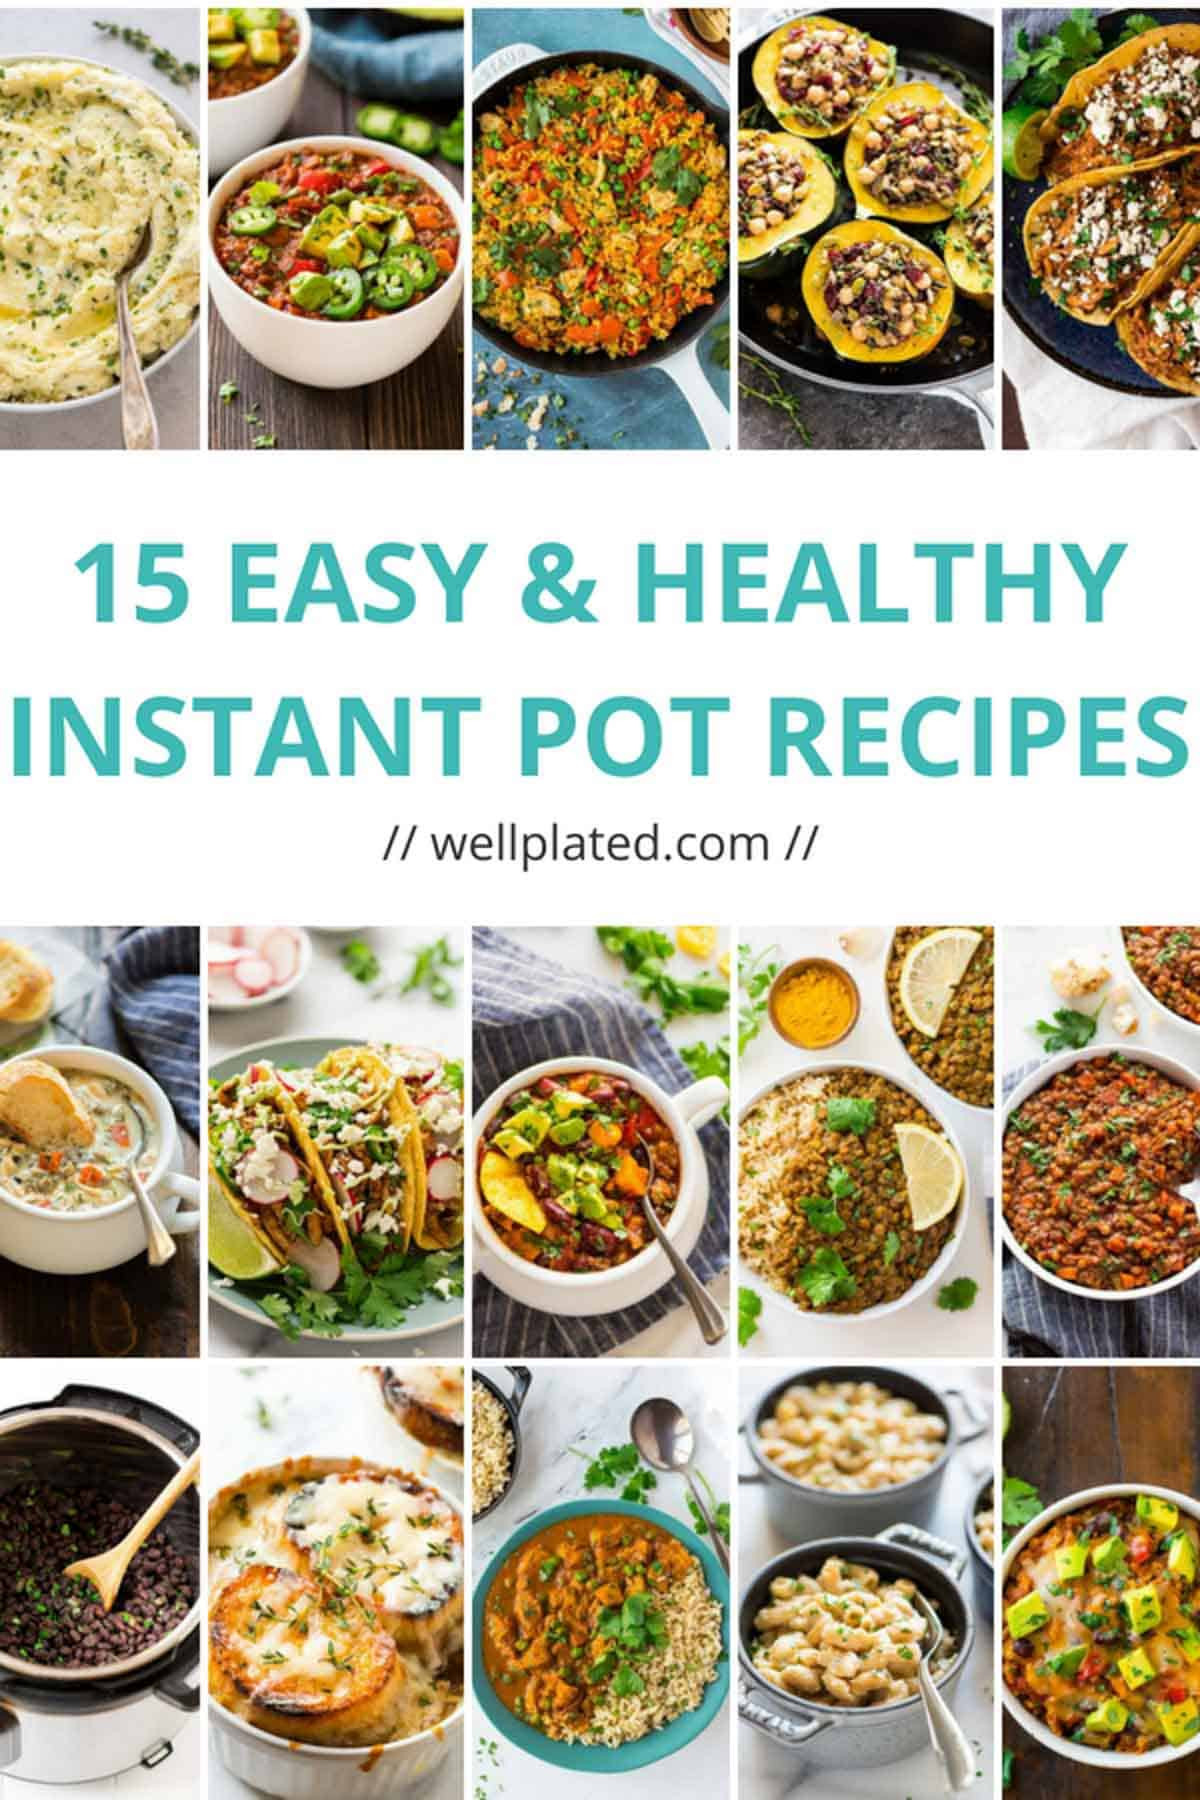 Instant Pot Healthy Chicken Recipes
 Healthy Instant Pot Recipes That Anyone Can Make